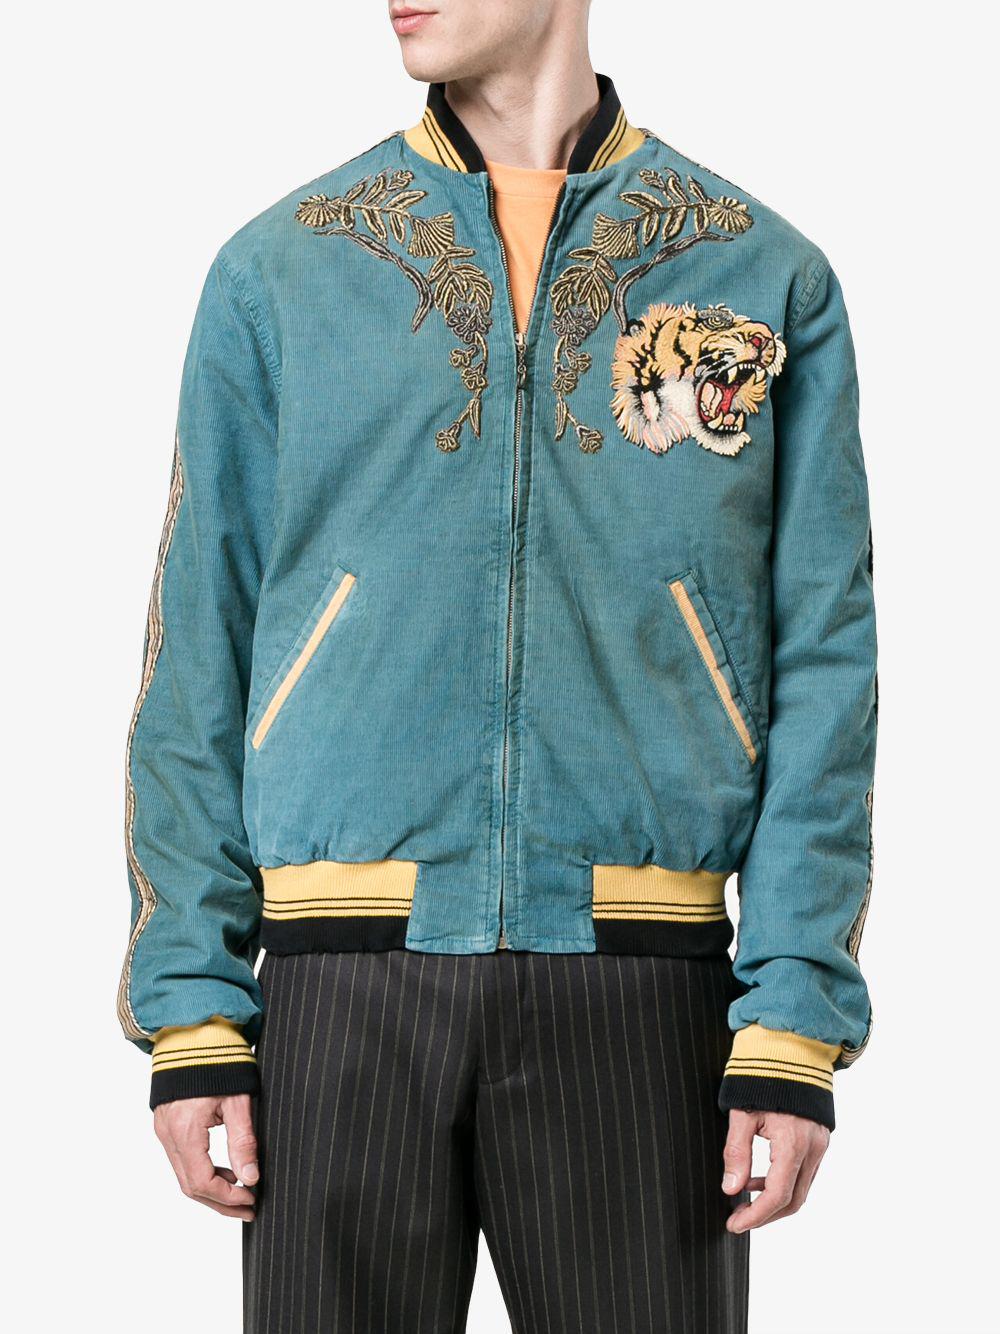 Gucci Loved Embroidered Bomber Jacket in Blue for Men